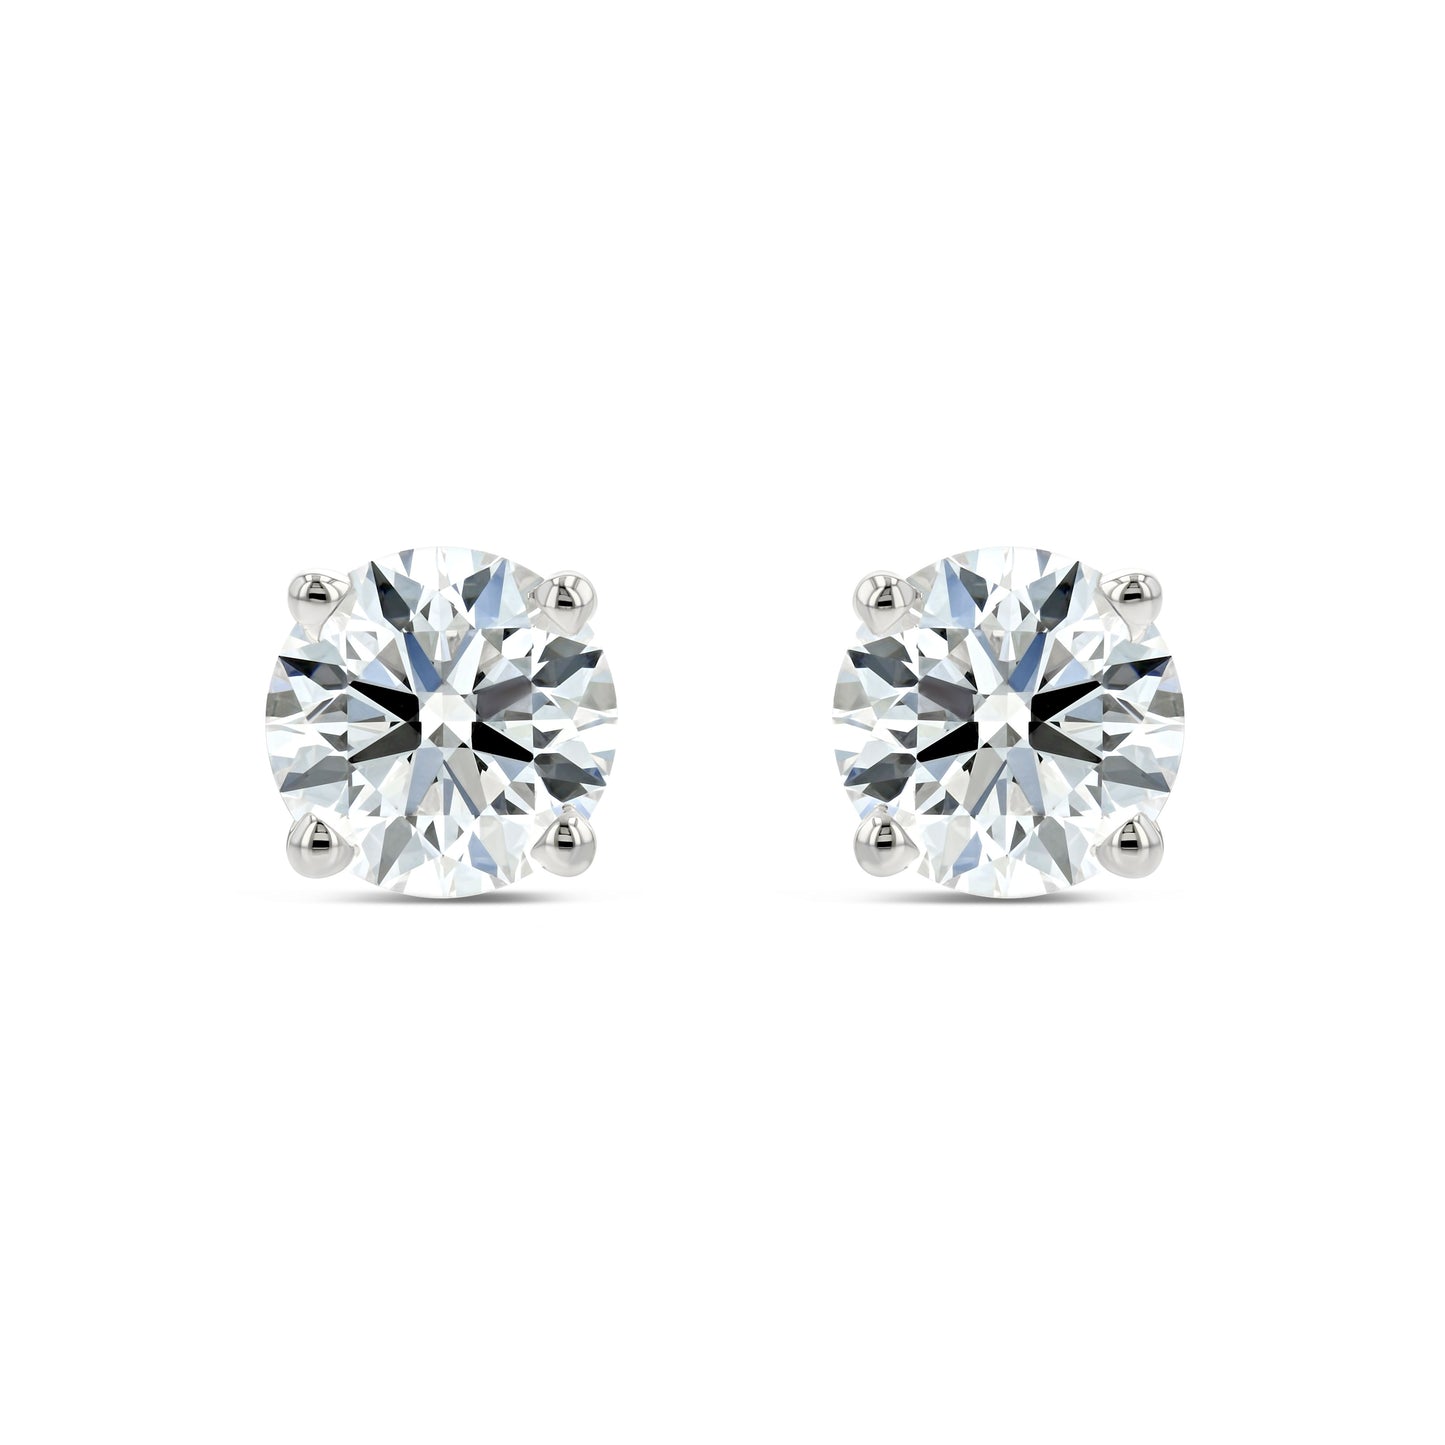 14k White Gold 4-prong Round Diamond Stud Earrings 1/2ctw (4.0mm Ea), G-h Color, I1 Clarity